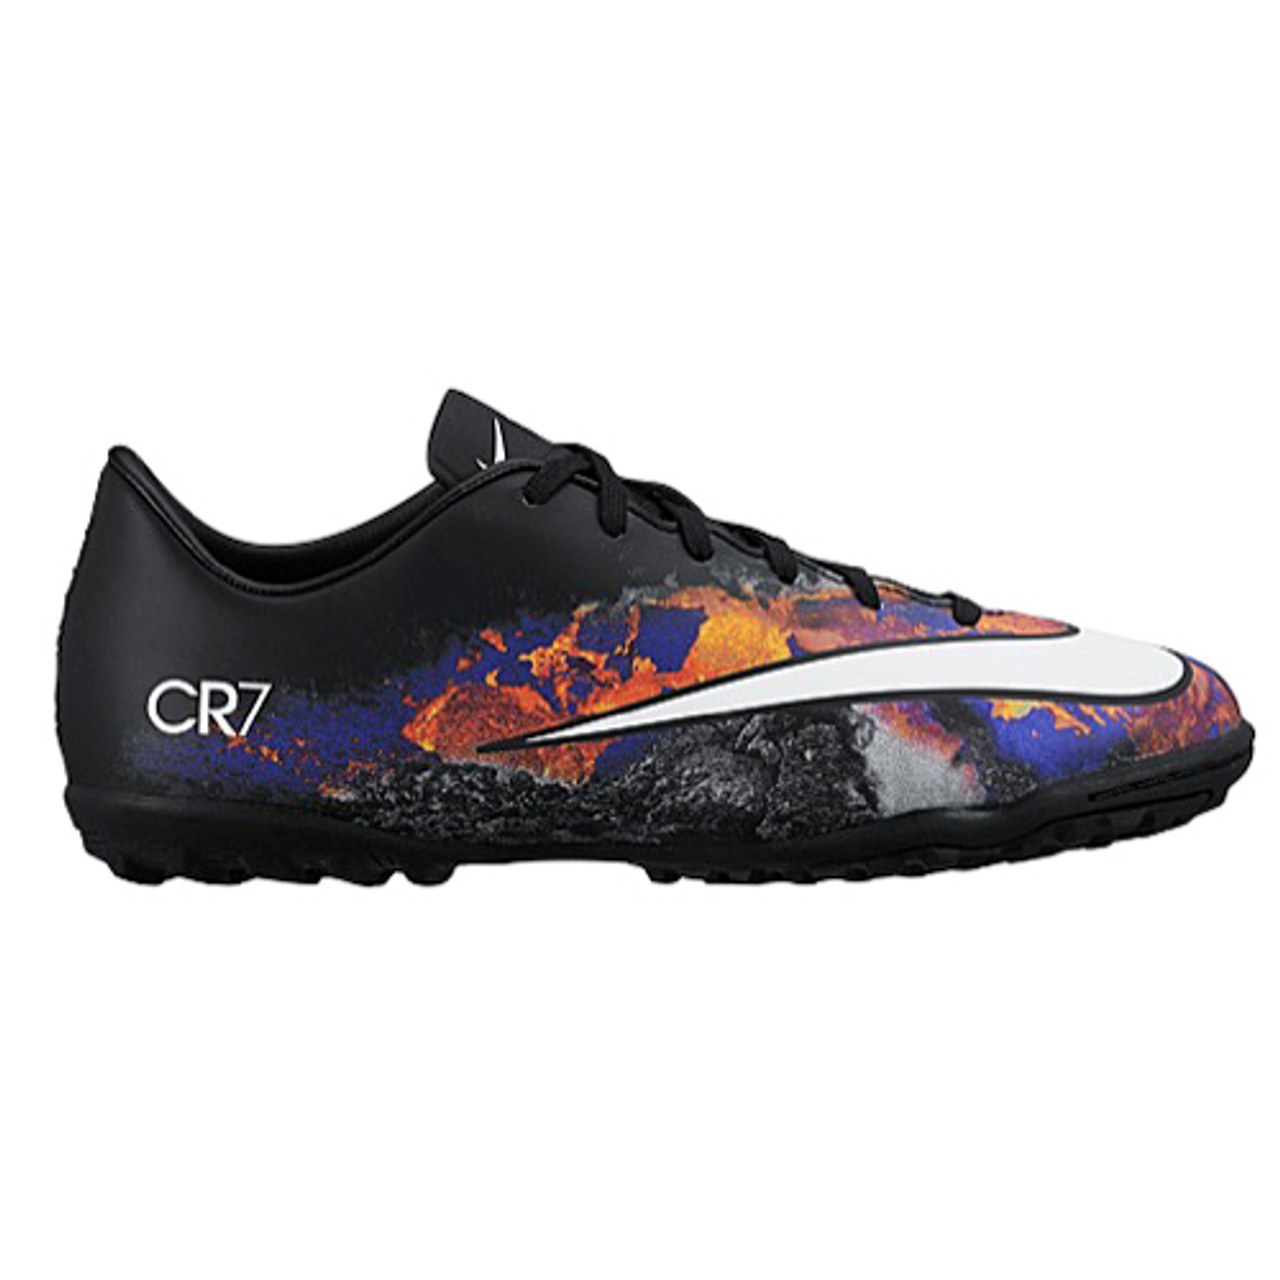 cr7 boots shop Nike Football Shoes Cleats for sale